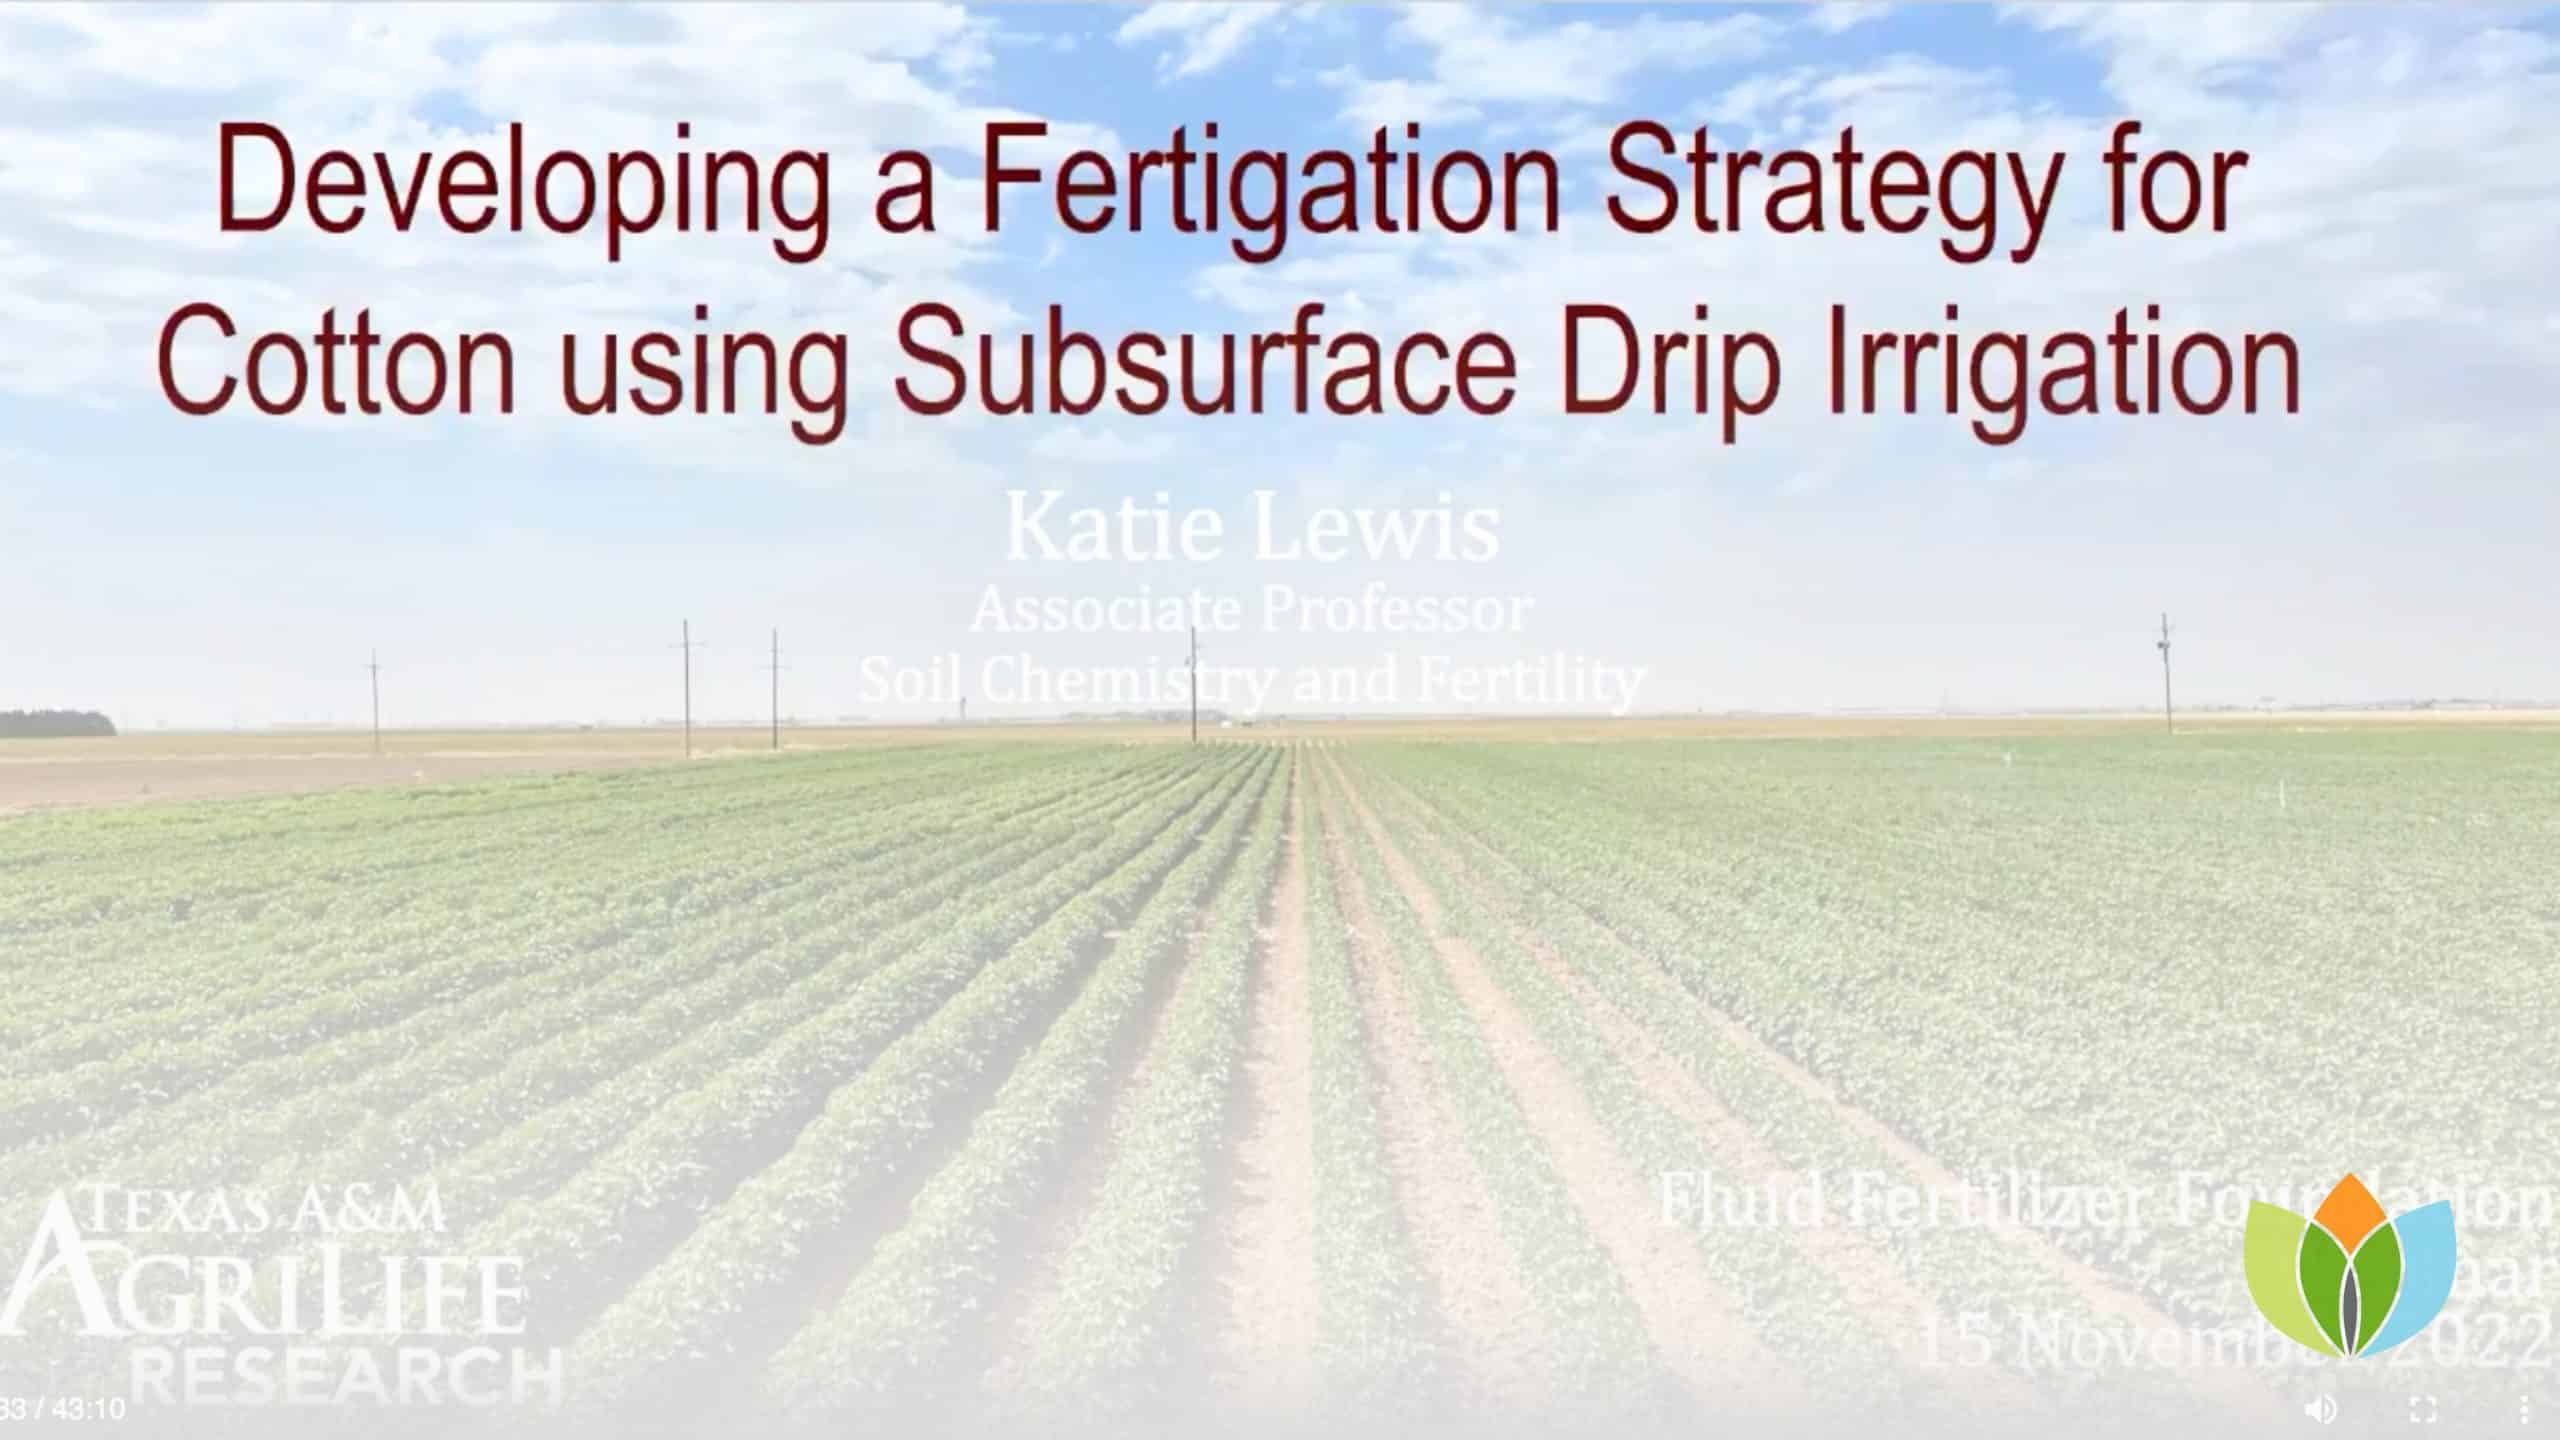 Developing a Fertigation Strategy for Cotton using Subsurface Drip Irrigation